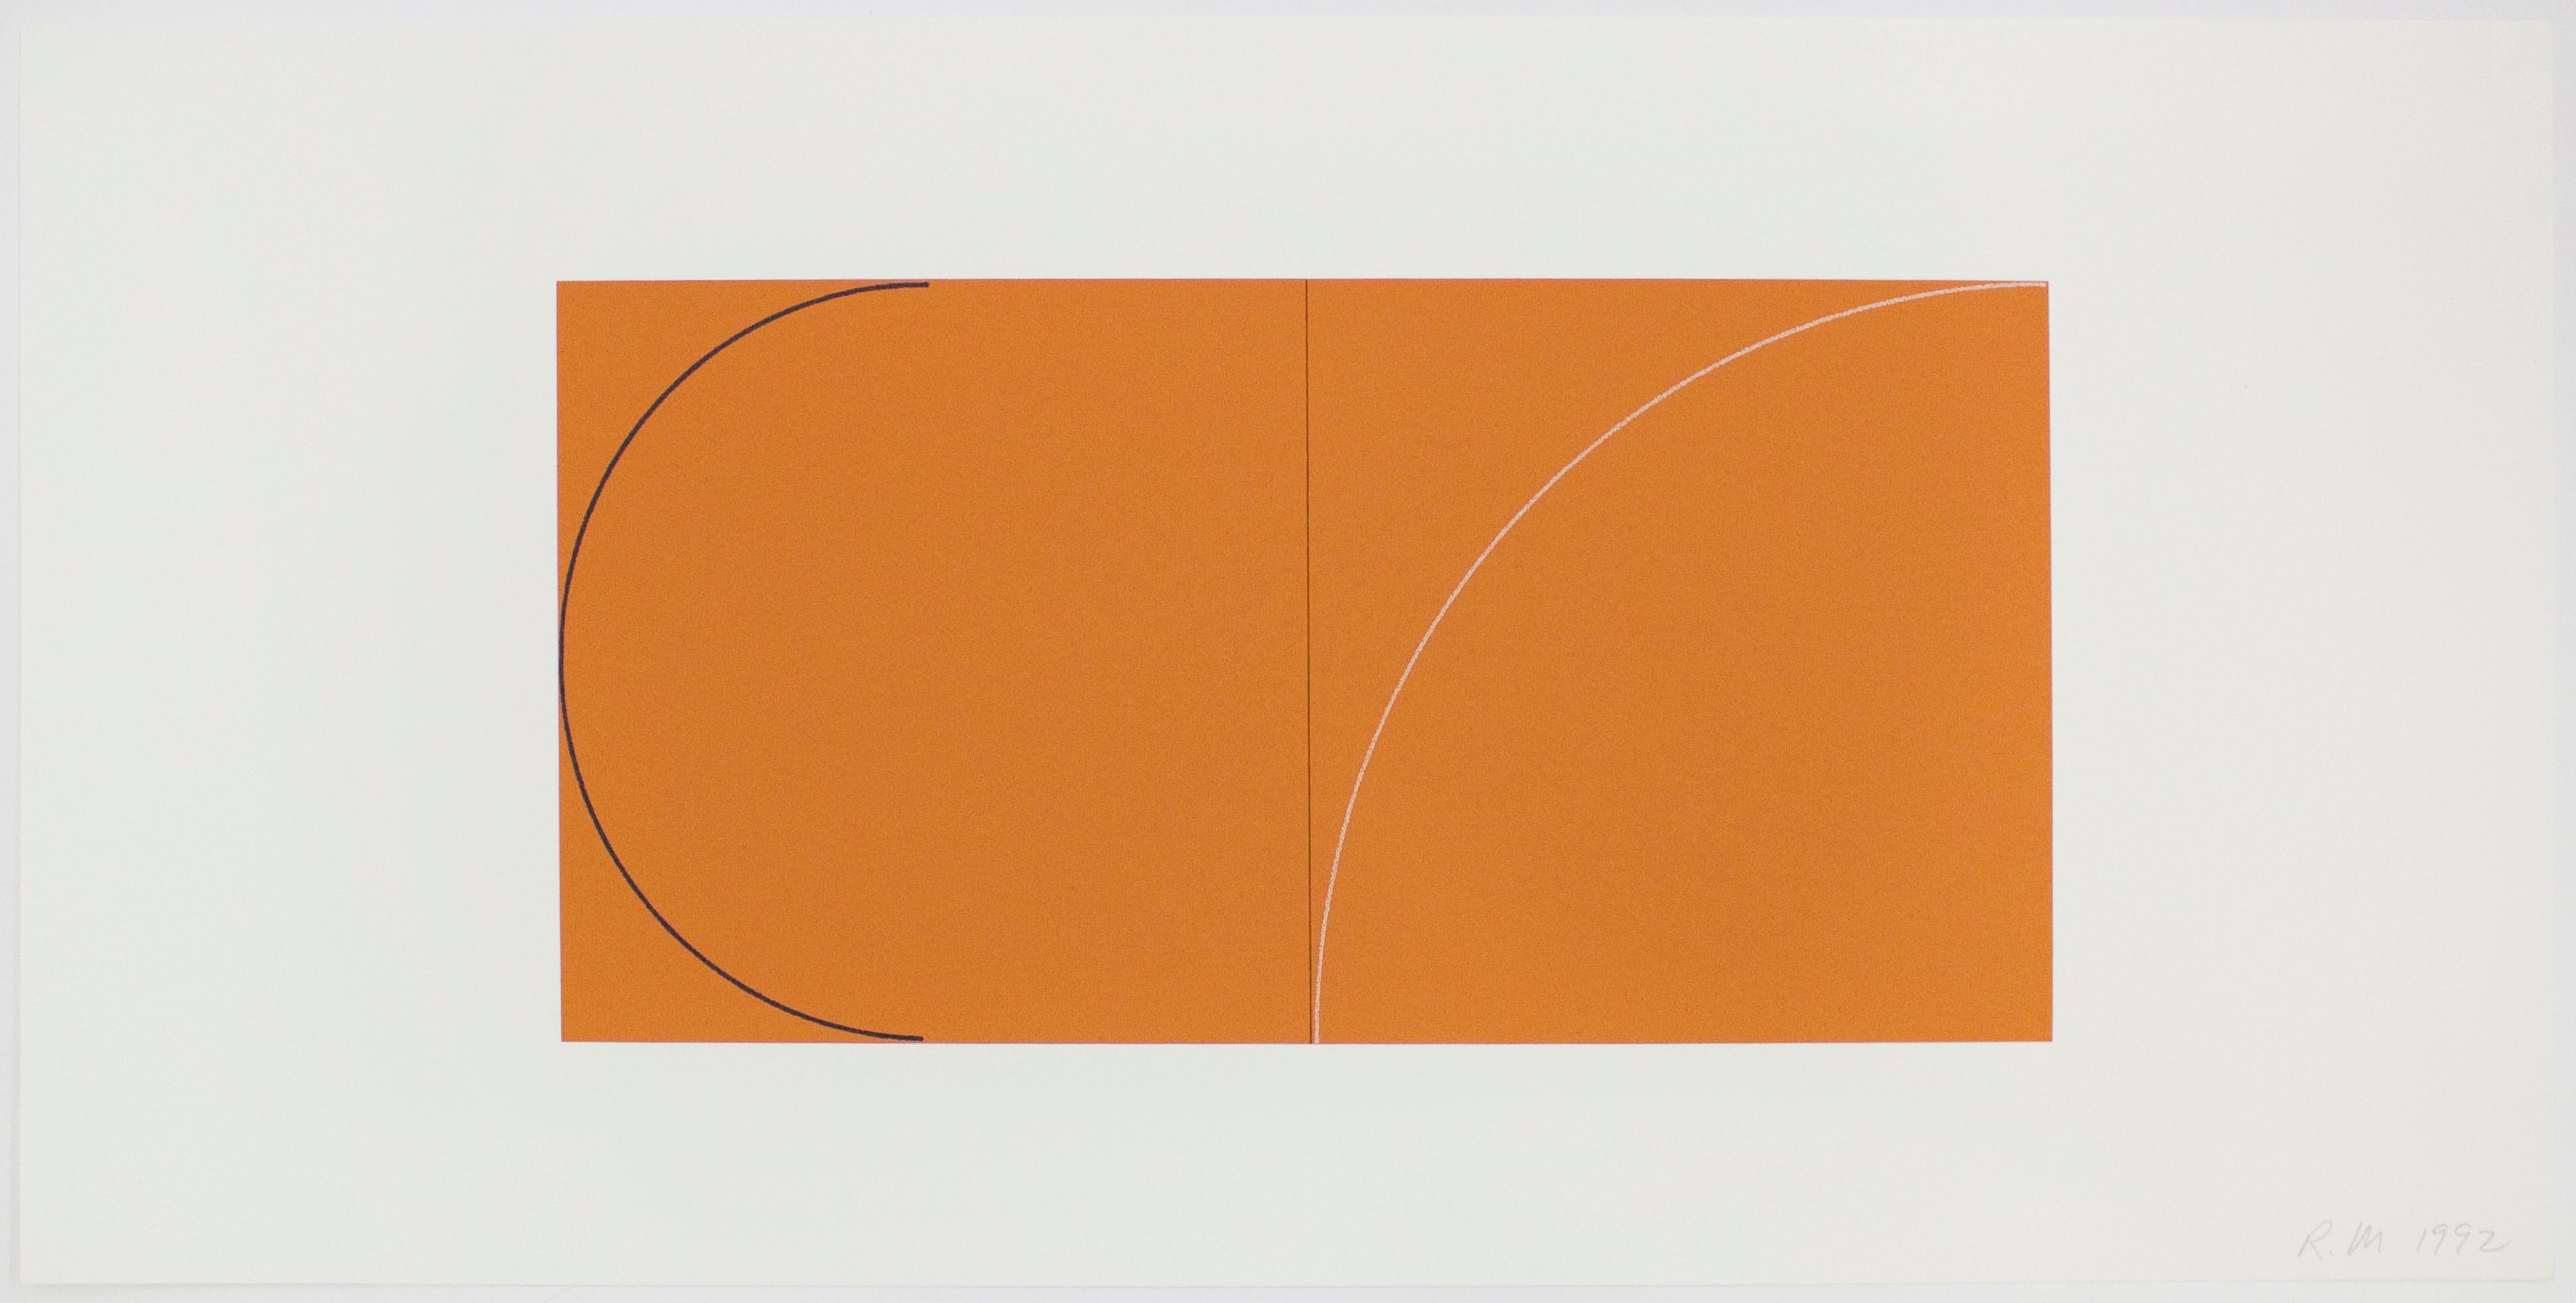 Associated with the Minimalist art movement of the 1960s, Mangold developed a reductive vocabulary based on geometric forms, monochromatic color, and an emphasis on the flatness of the painted picture plane. Within this seemingly austere repertoire,